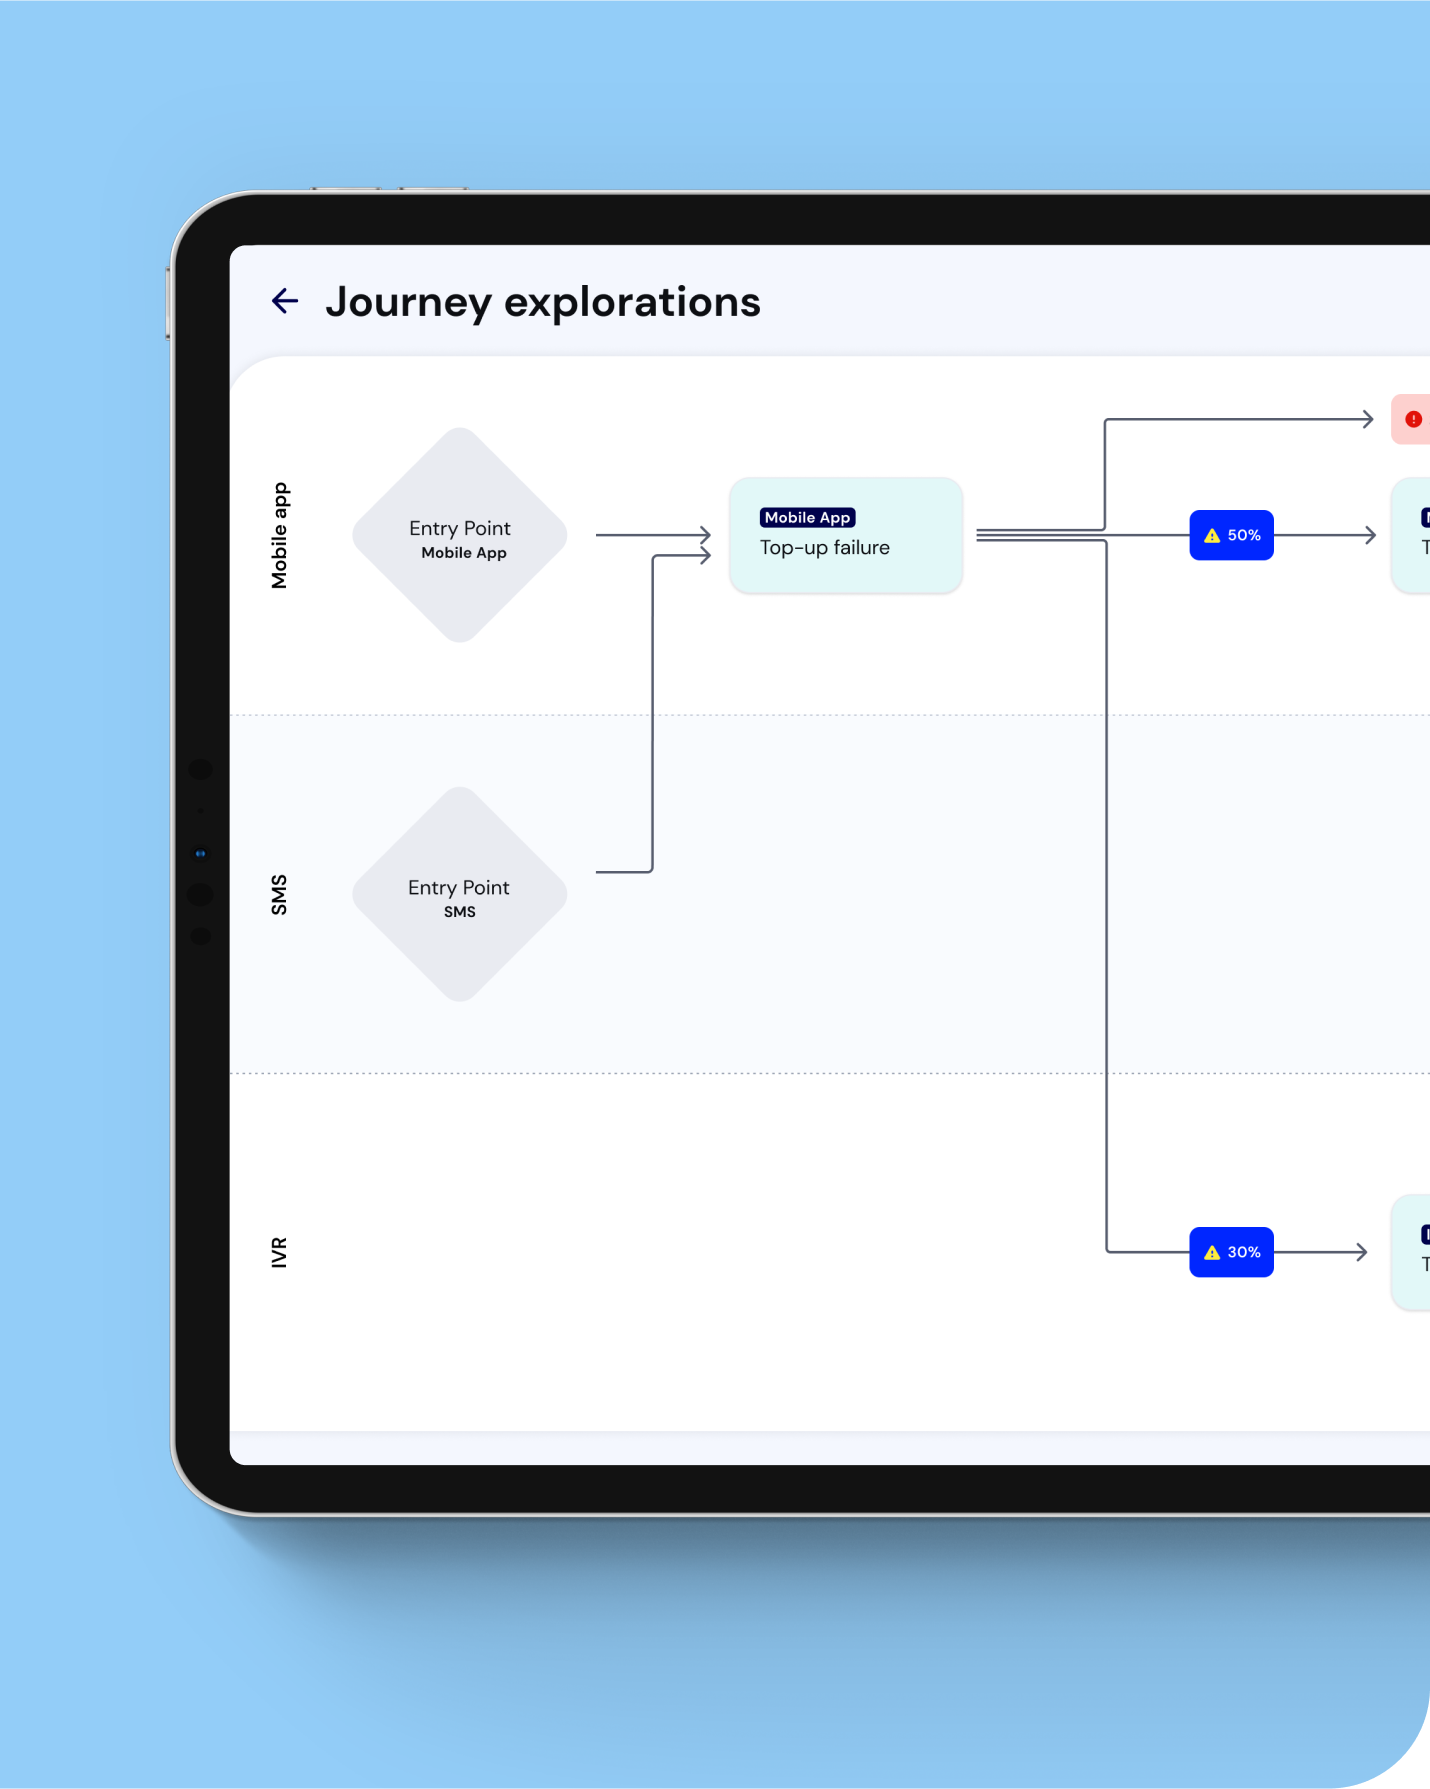 User interface design featuring a journey exploration screen with navigation and interactive elements